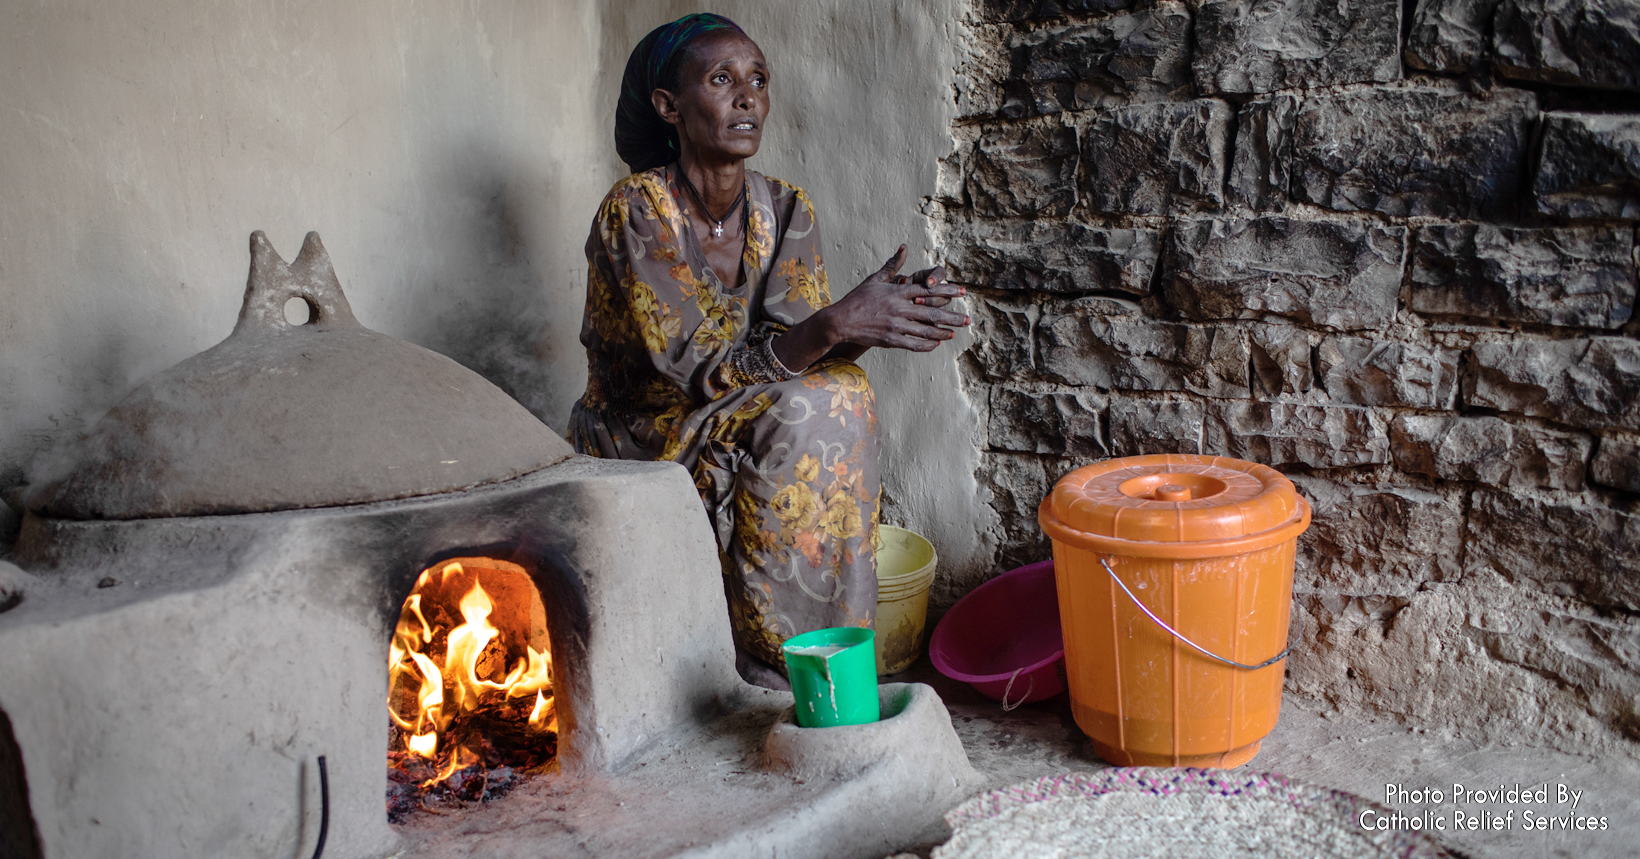 Febedu Mehari is cooking injera in her home. With the support from the CRS, she doesn’t need to sell her milk, goats, and hens to provide food for her family.